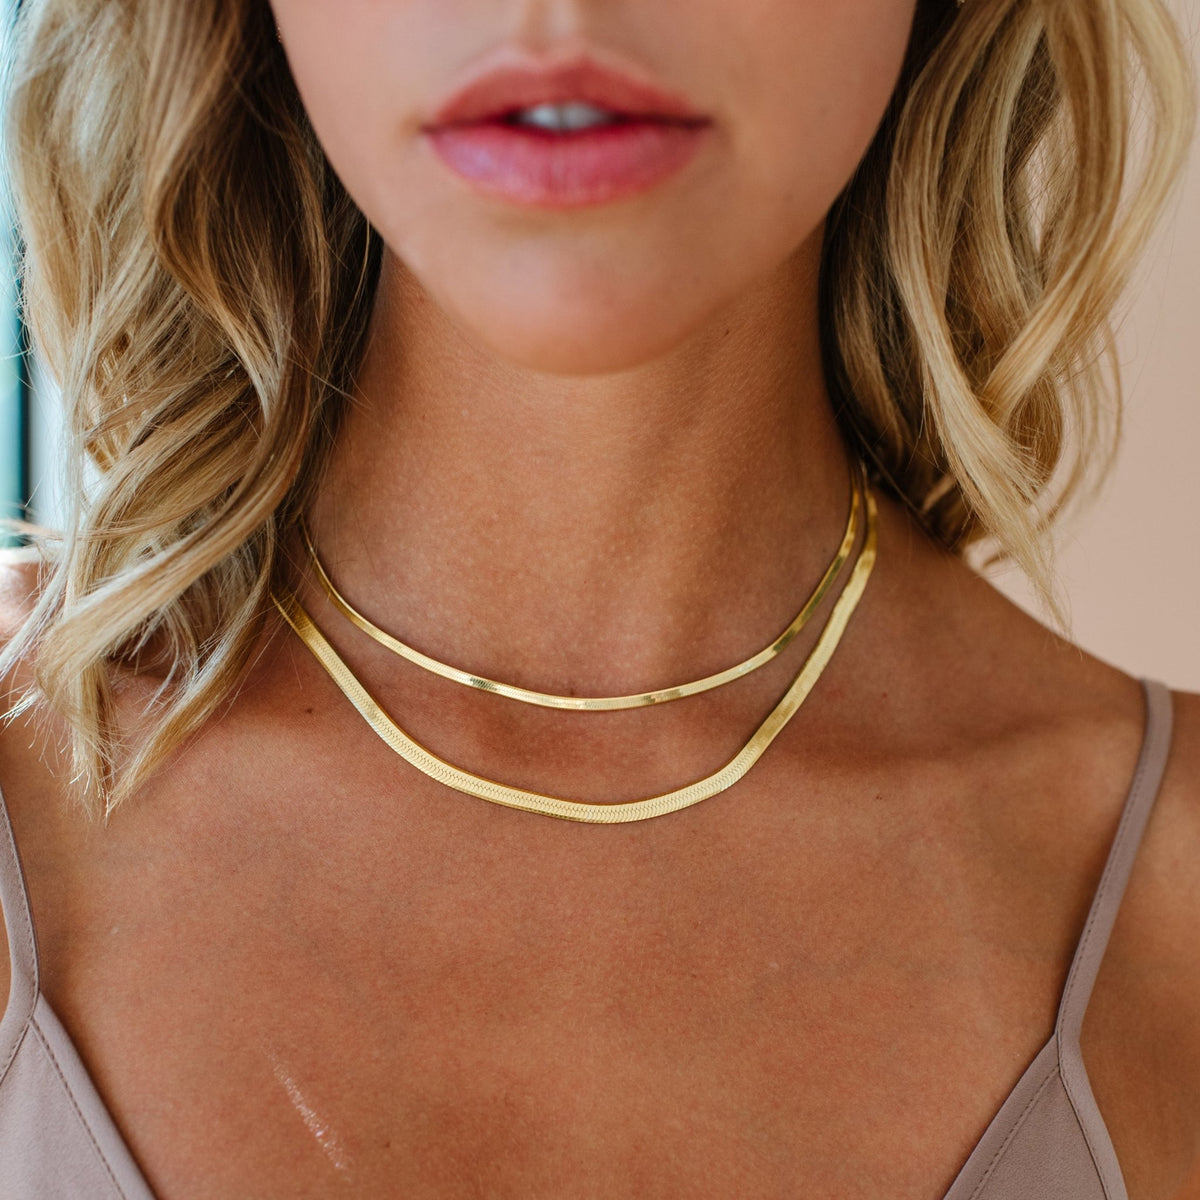 LUXE CHARMING HERRINGBONE CHAIN 16.5 - 18&quot; NECKLACE GOLD - SO PRETTY CARA COTTER